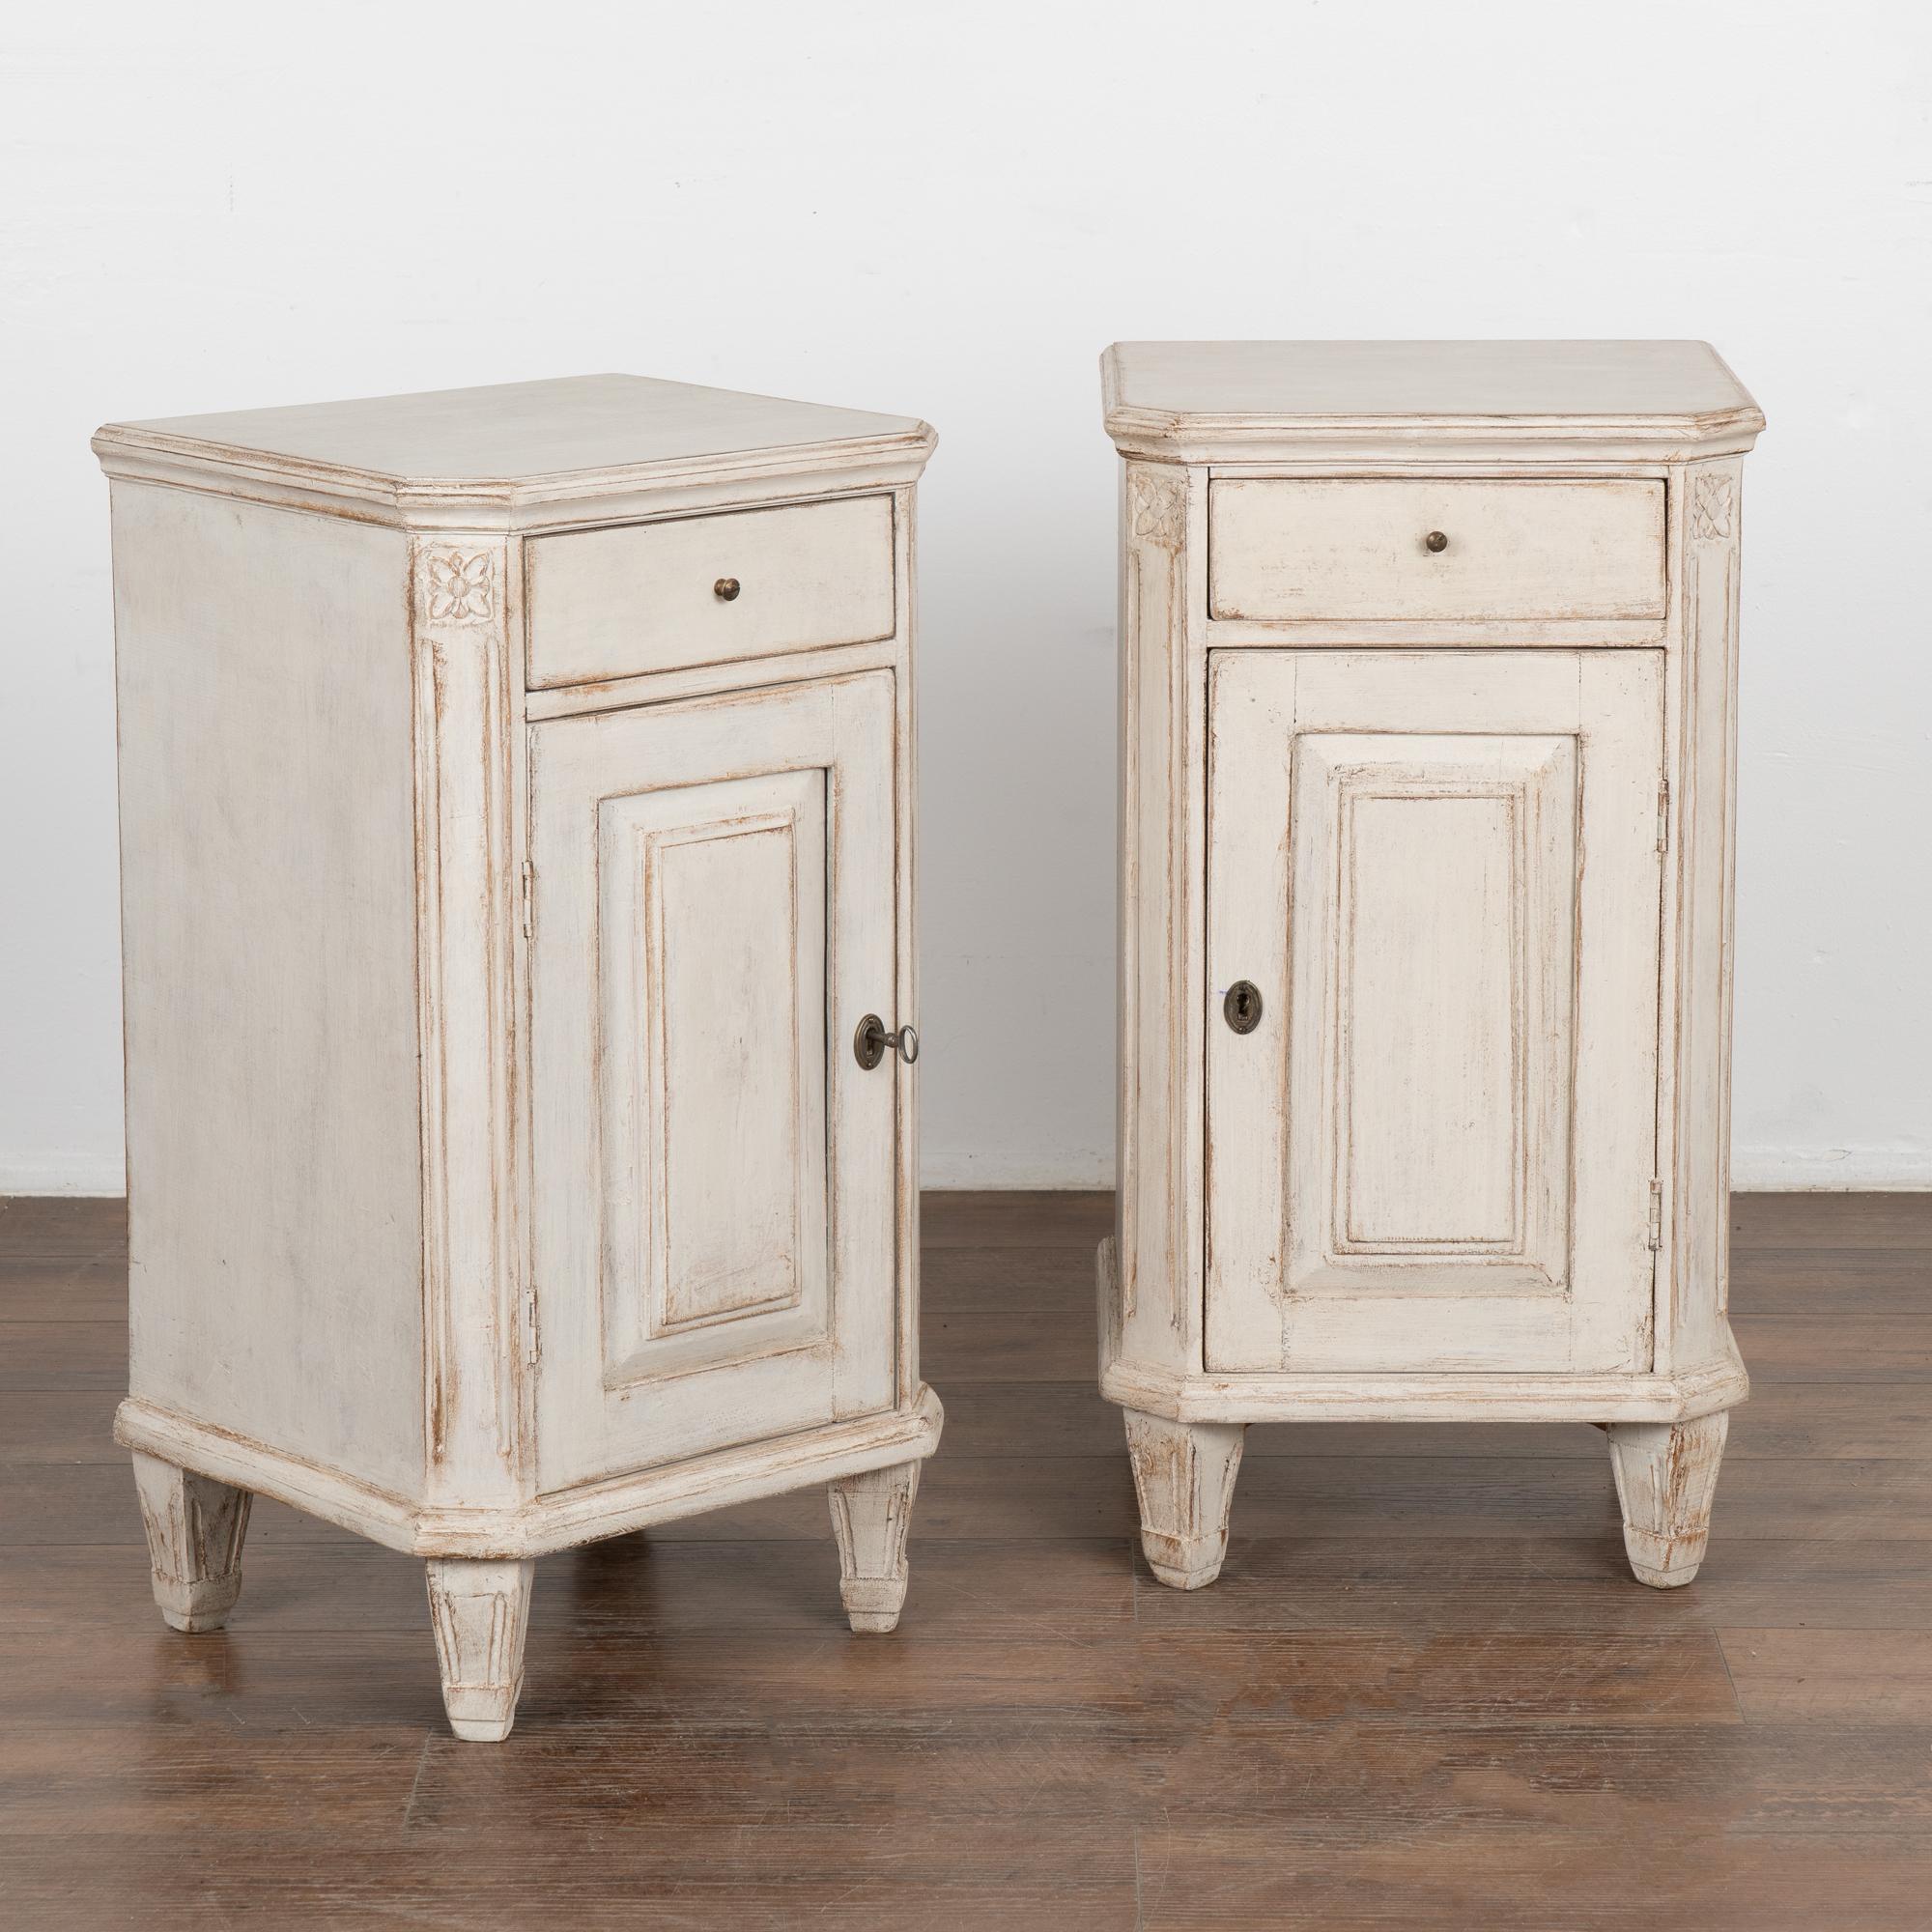 Pair, small Swedish country Gustavian style white painted nightstands or small cabinets standing on tapered feet.
Canted sides have simple fluted carving topped with floral medallion.
Newer professionally applied exterior white painted finish is